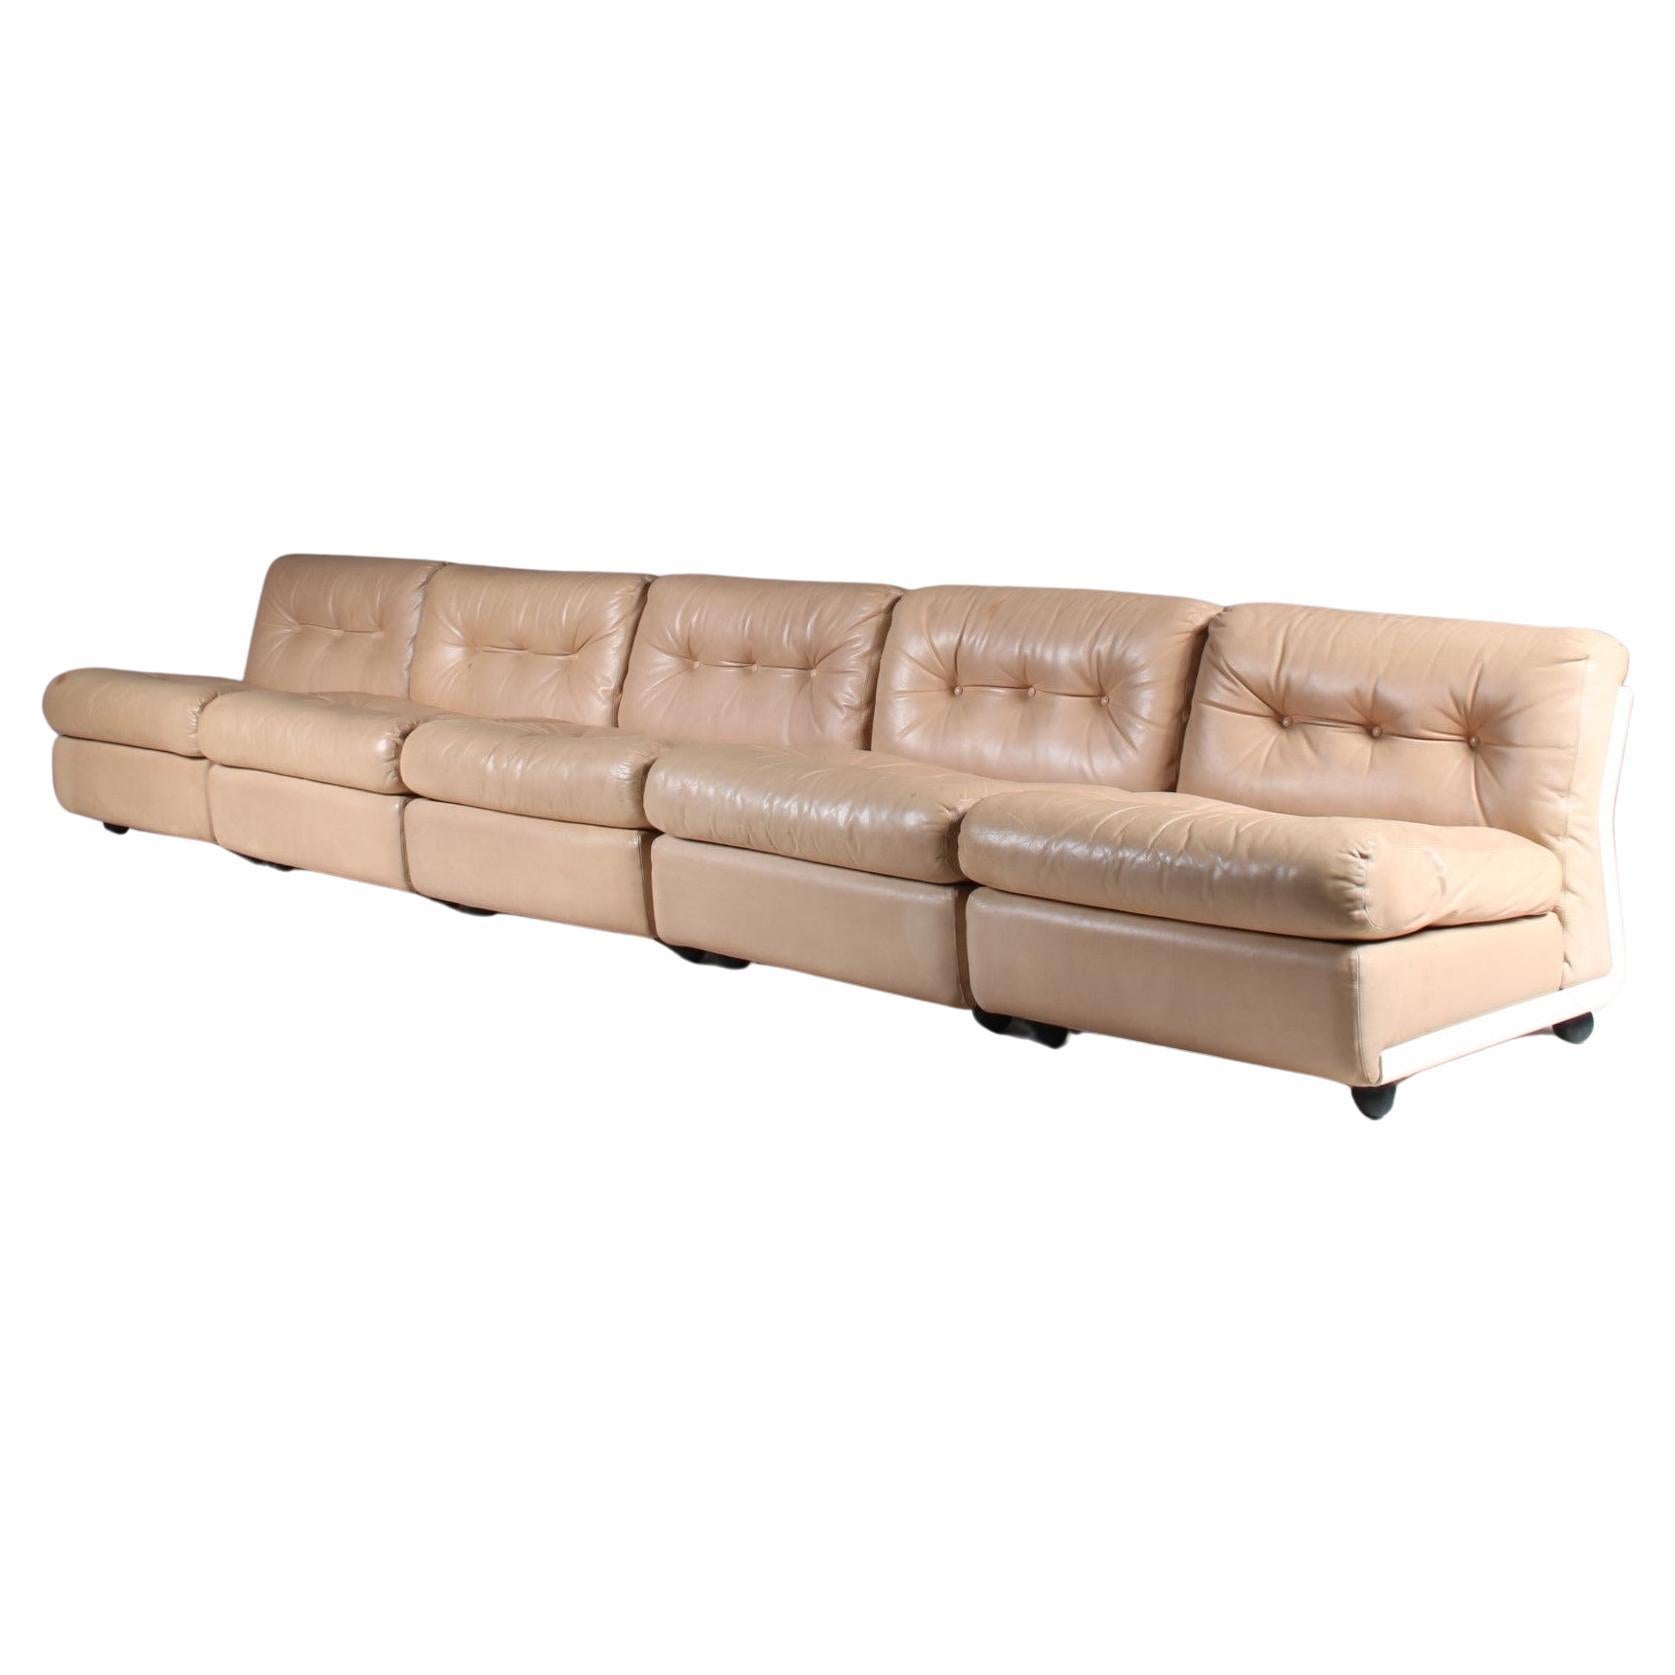 “Amanta” Sectional Sofa by Mario Bellini for C&B Italia, 1960 For Sale